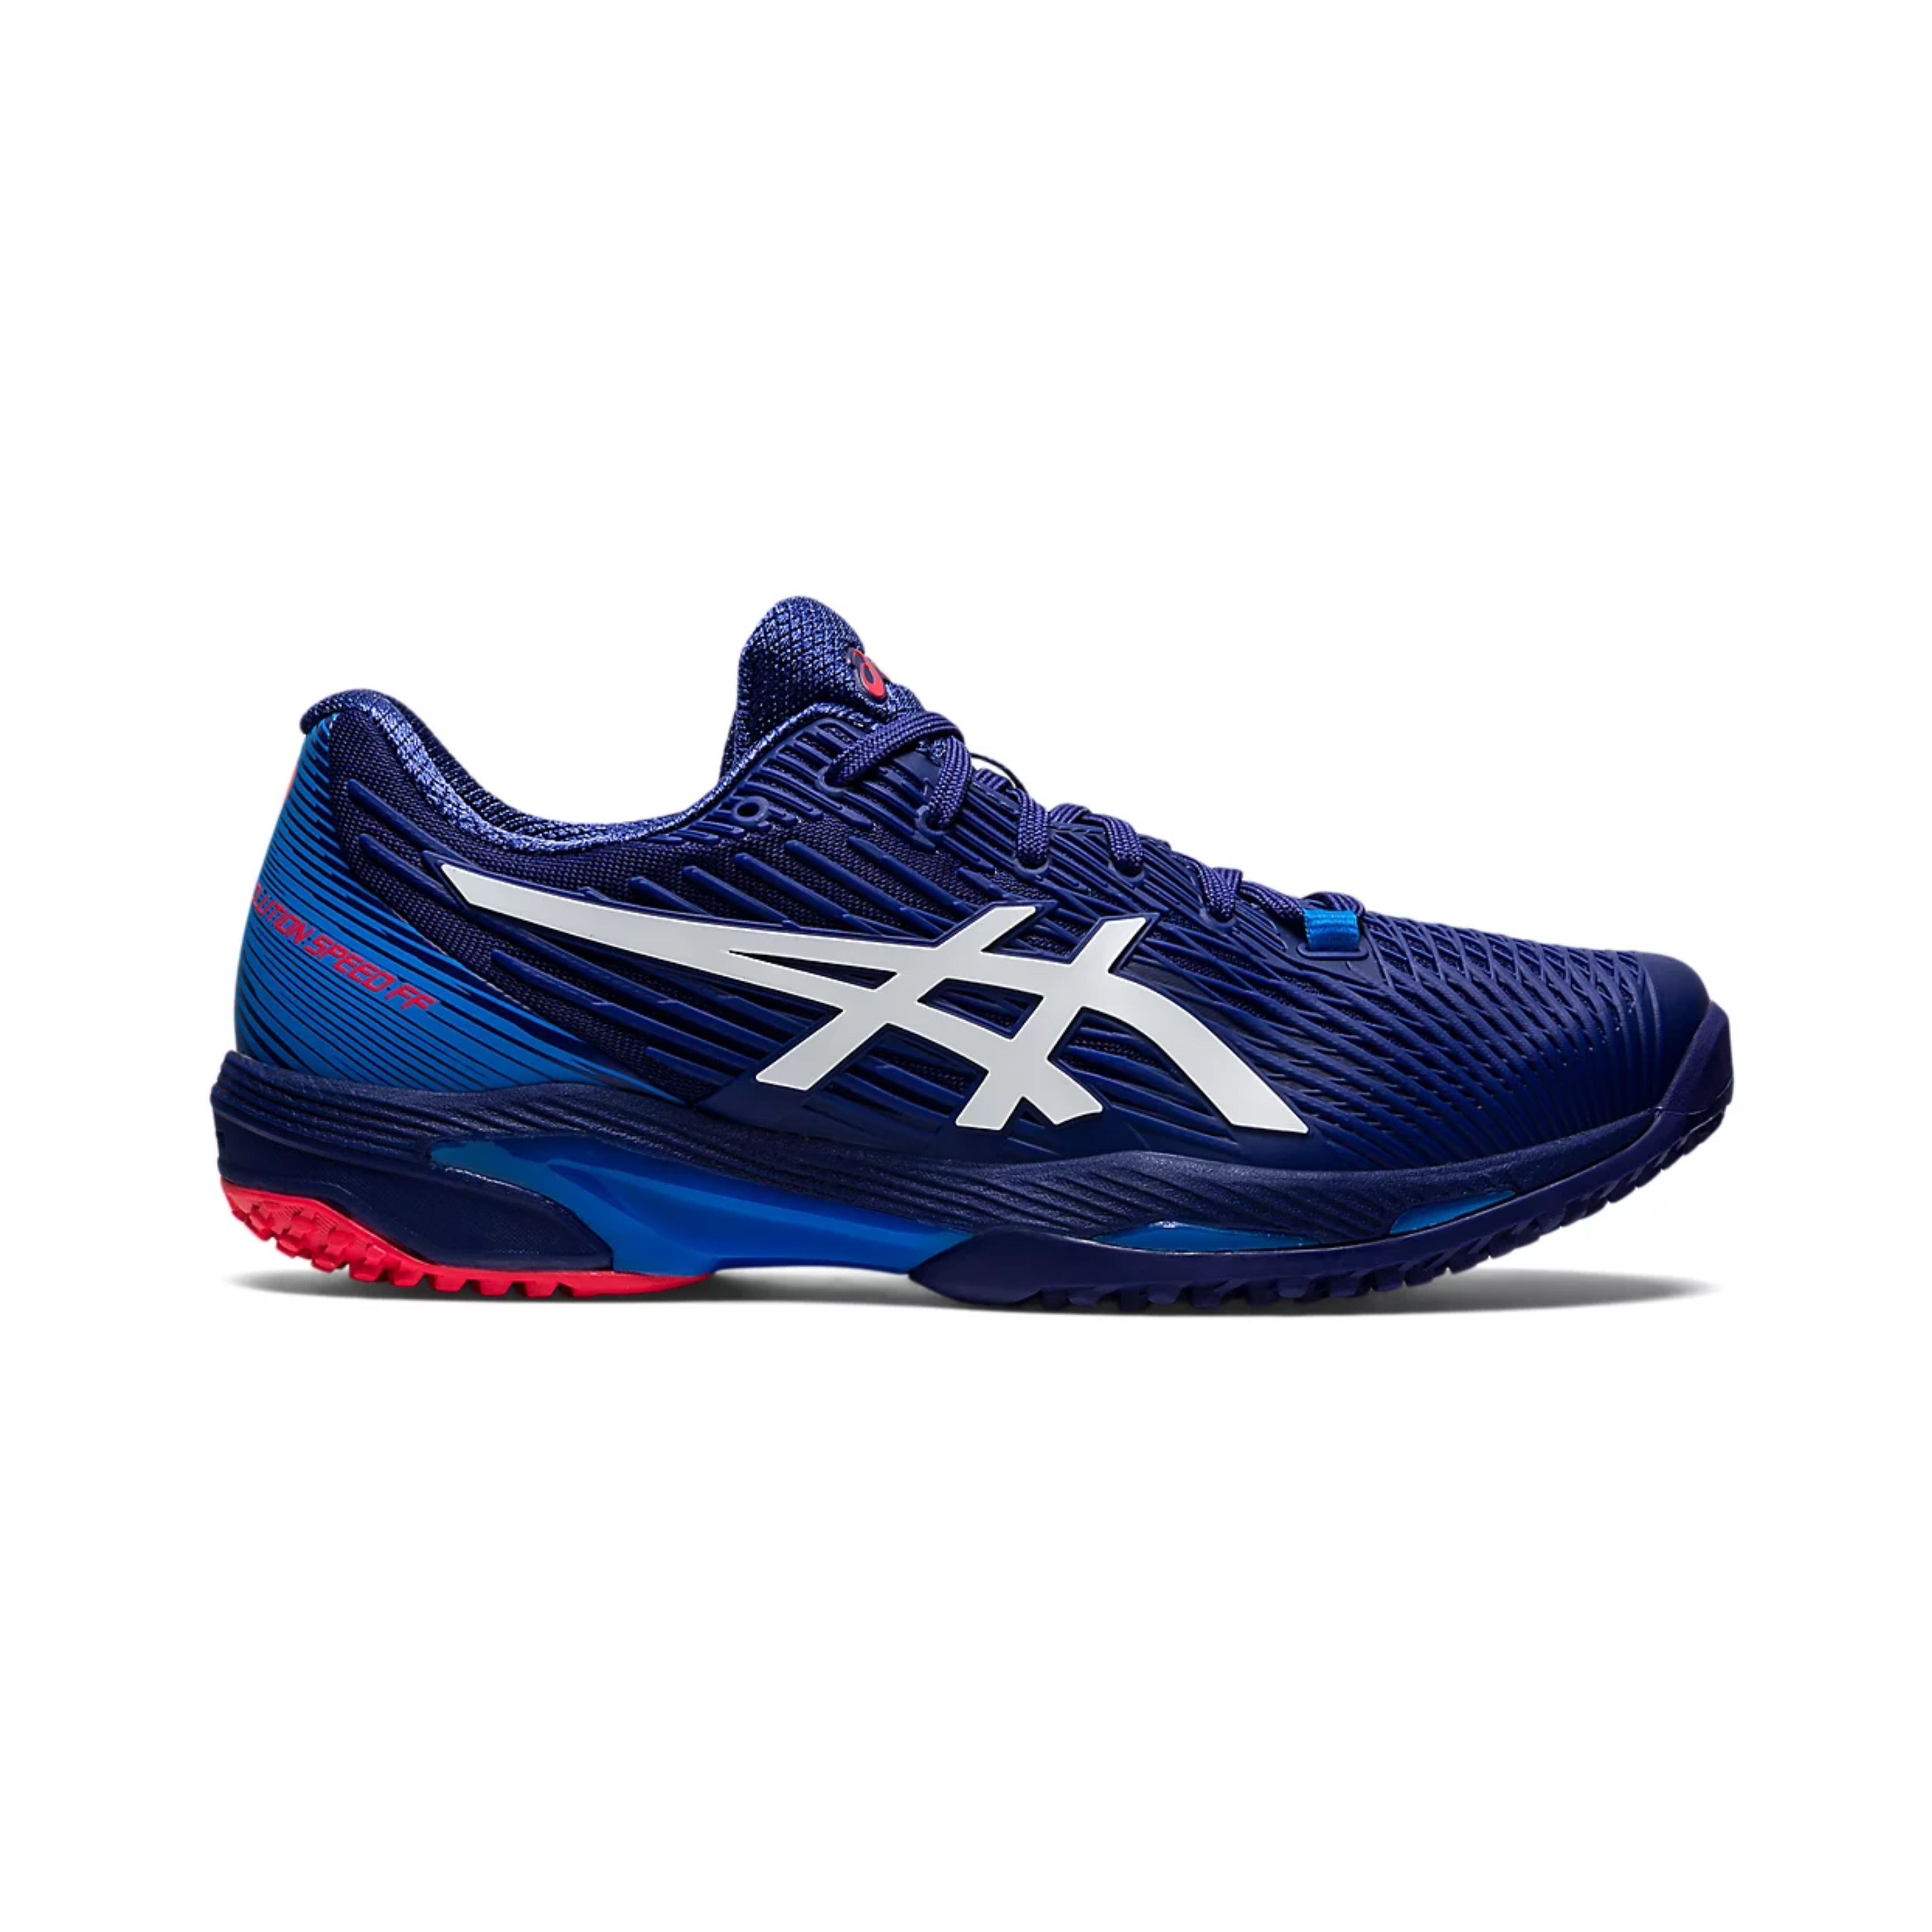 giay-tennis-asics-solution-speed-ff-2-dive-blue-white